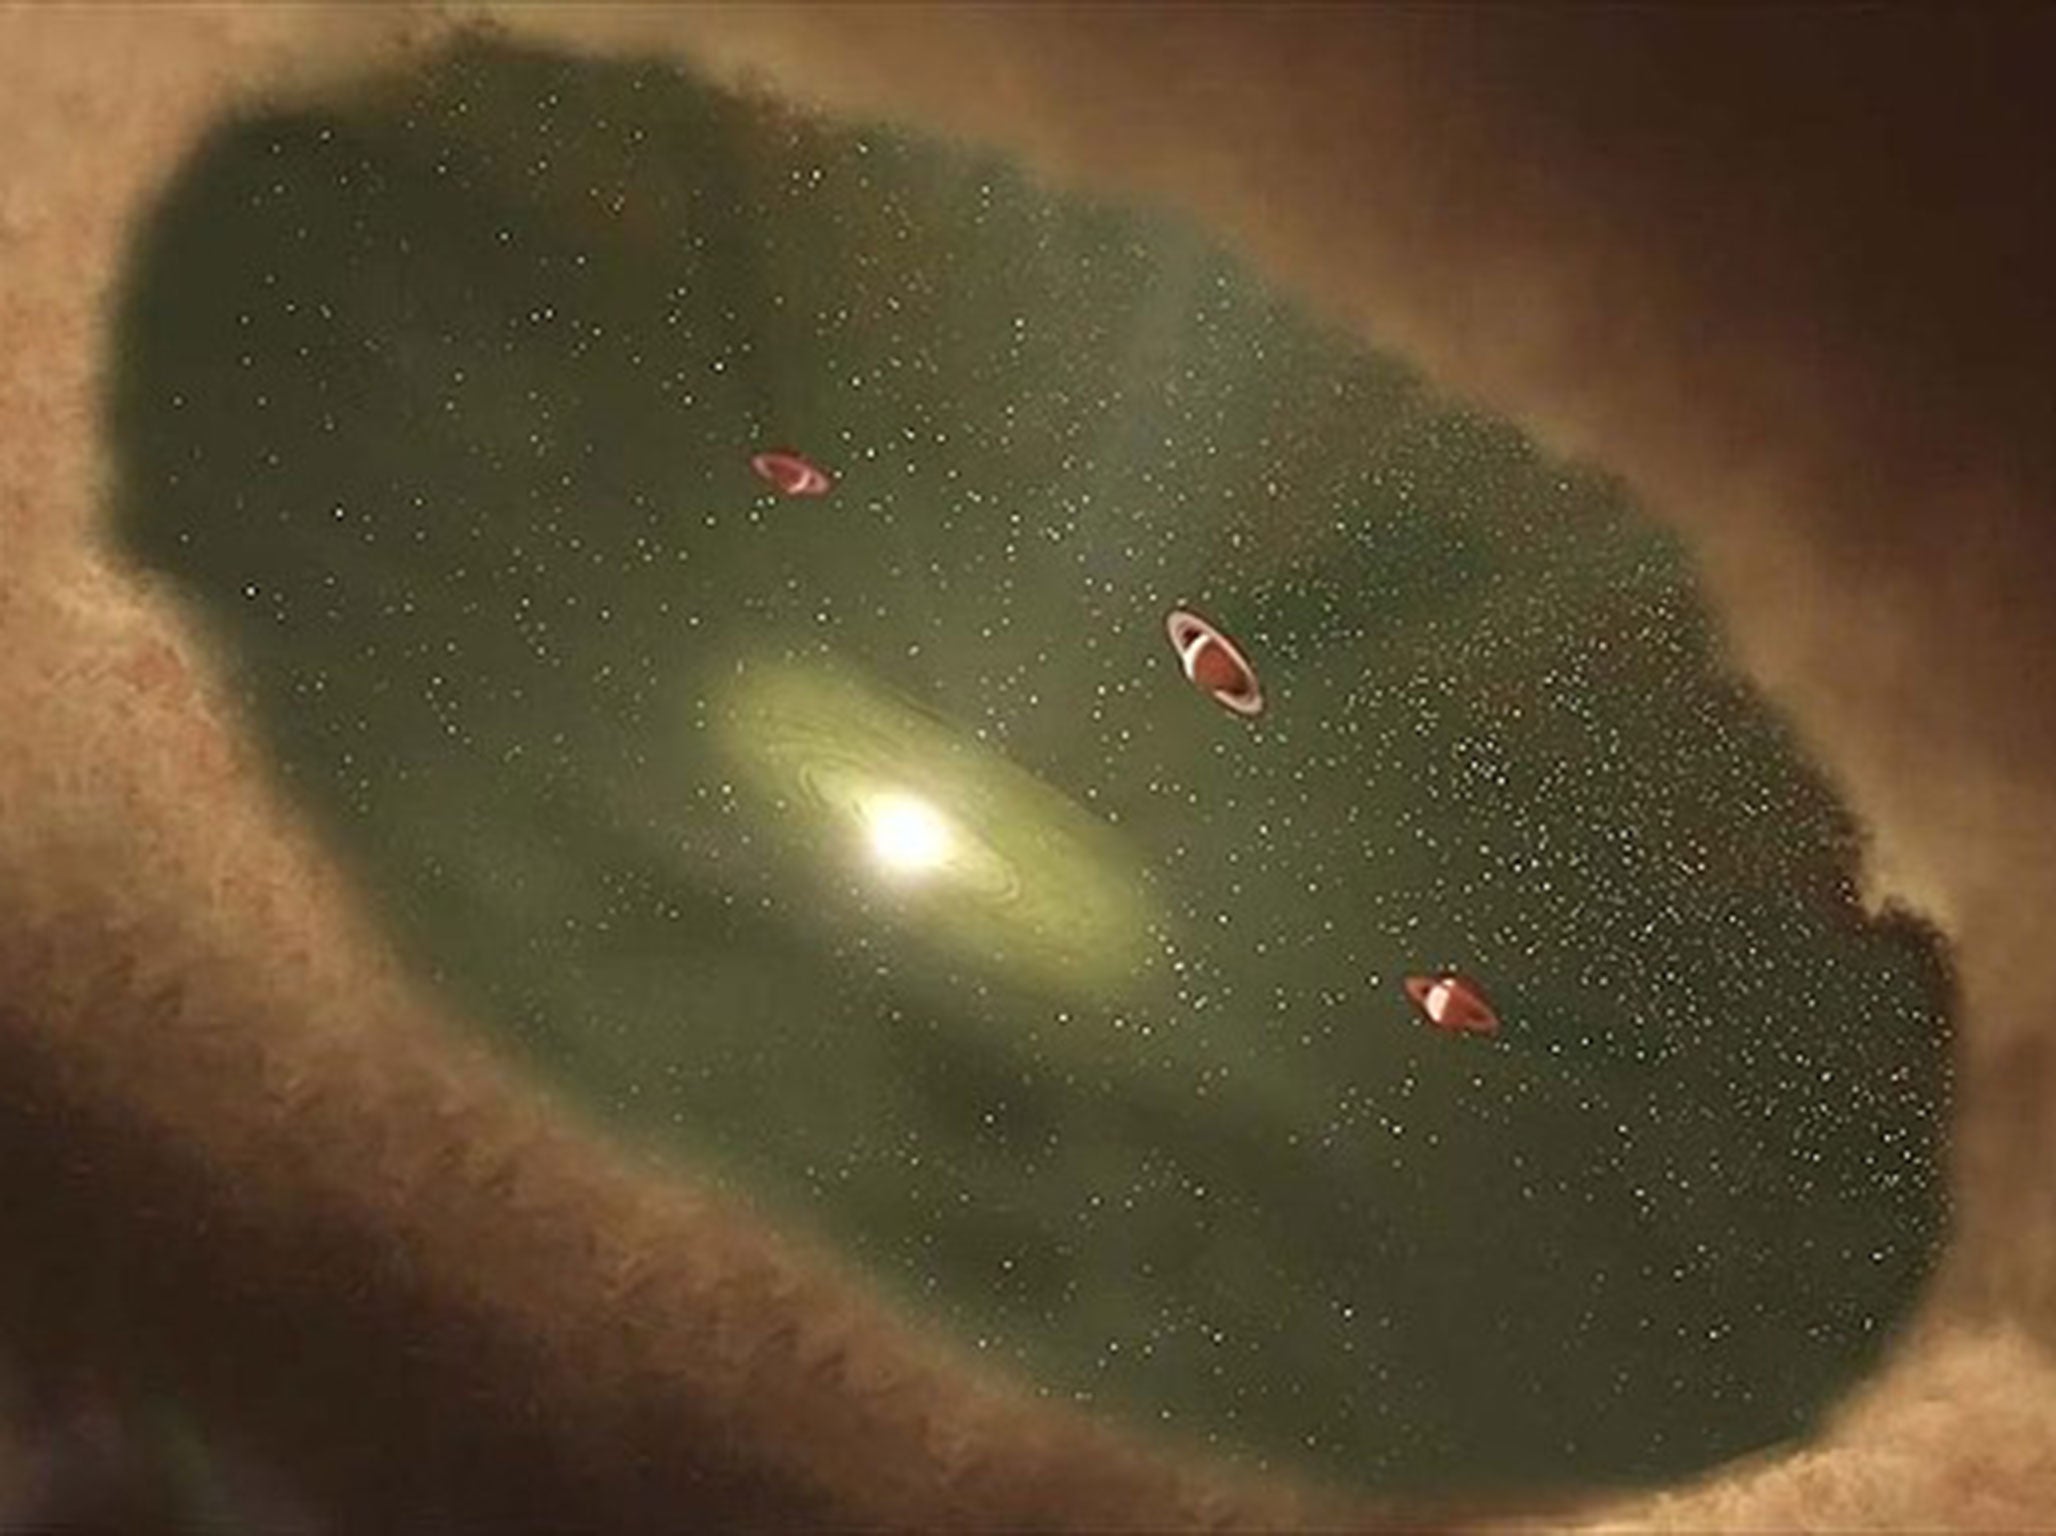 This is an artist's conception of planets forming in a transition disk like LkCa 15. The planets within the disk clearing sweep up material that would have otherwise fallen onto the star